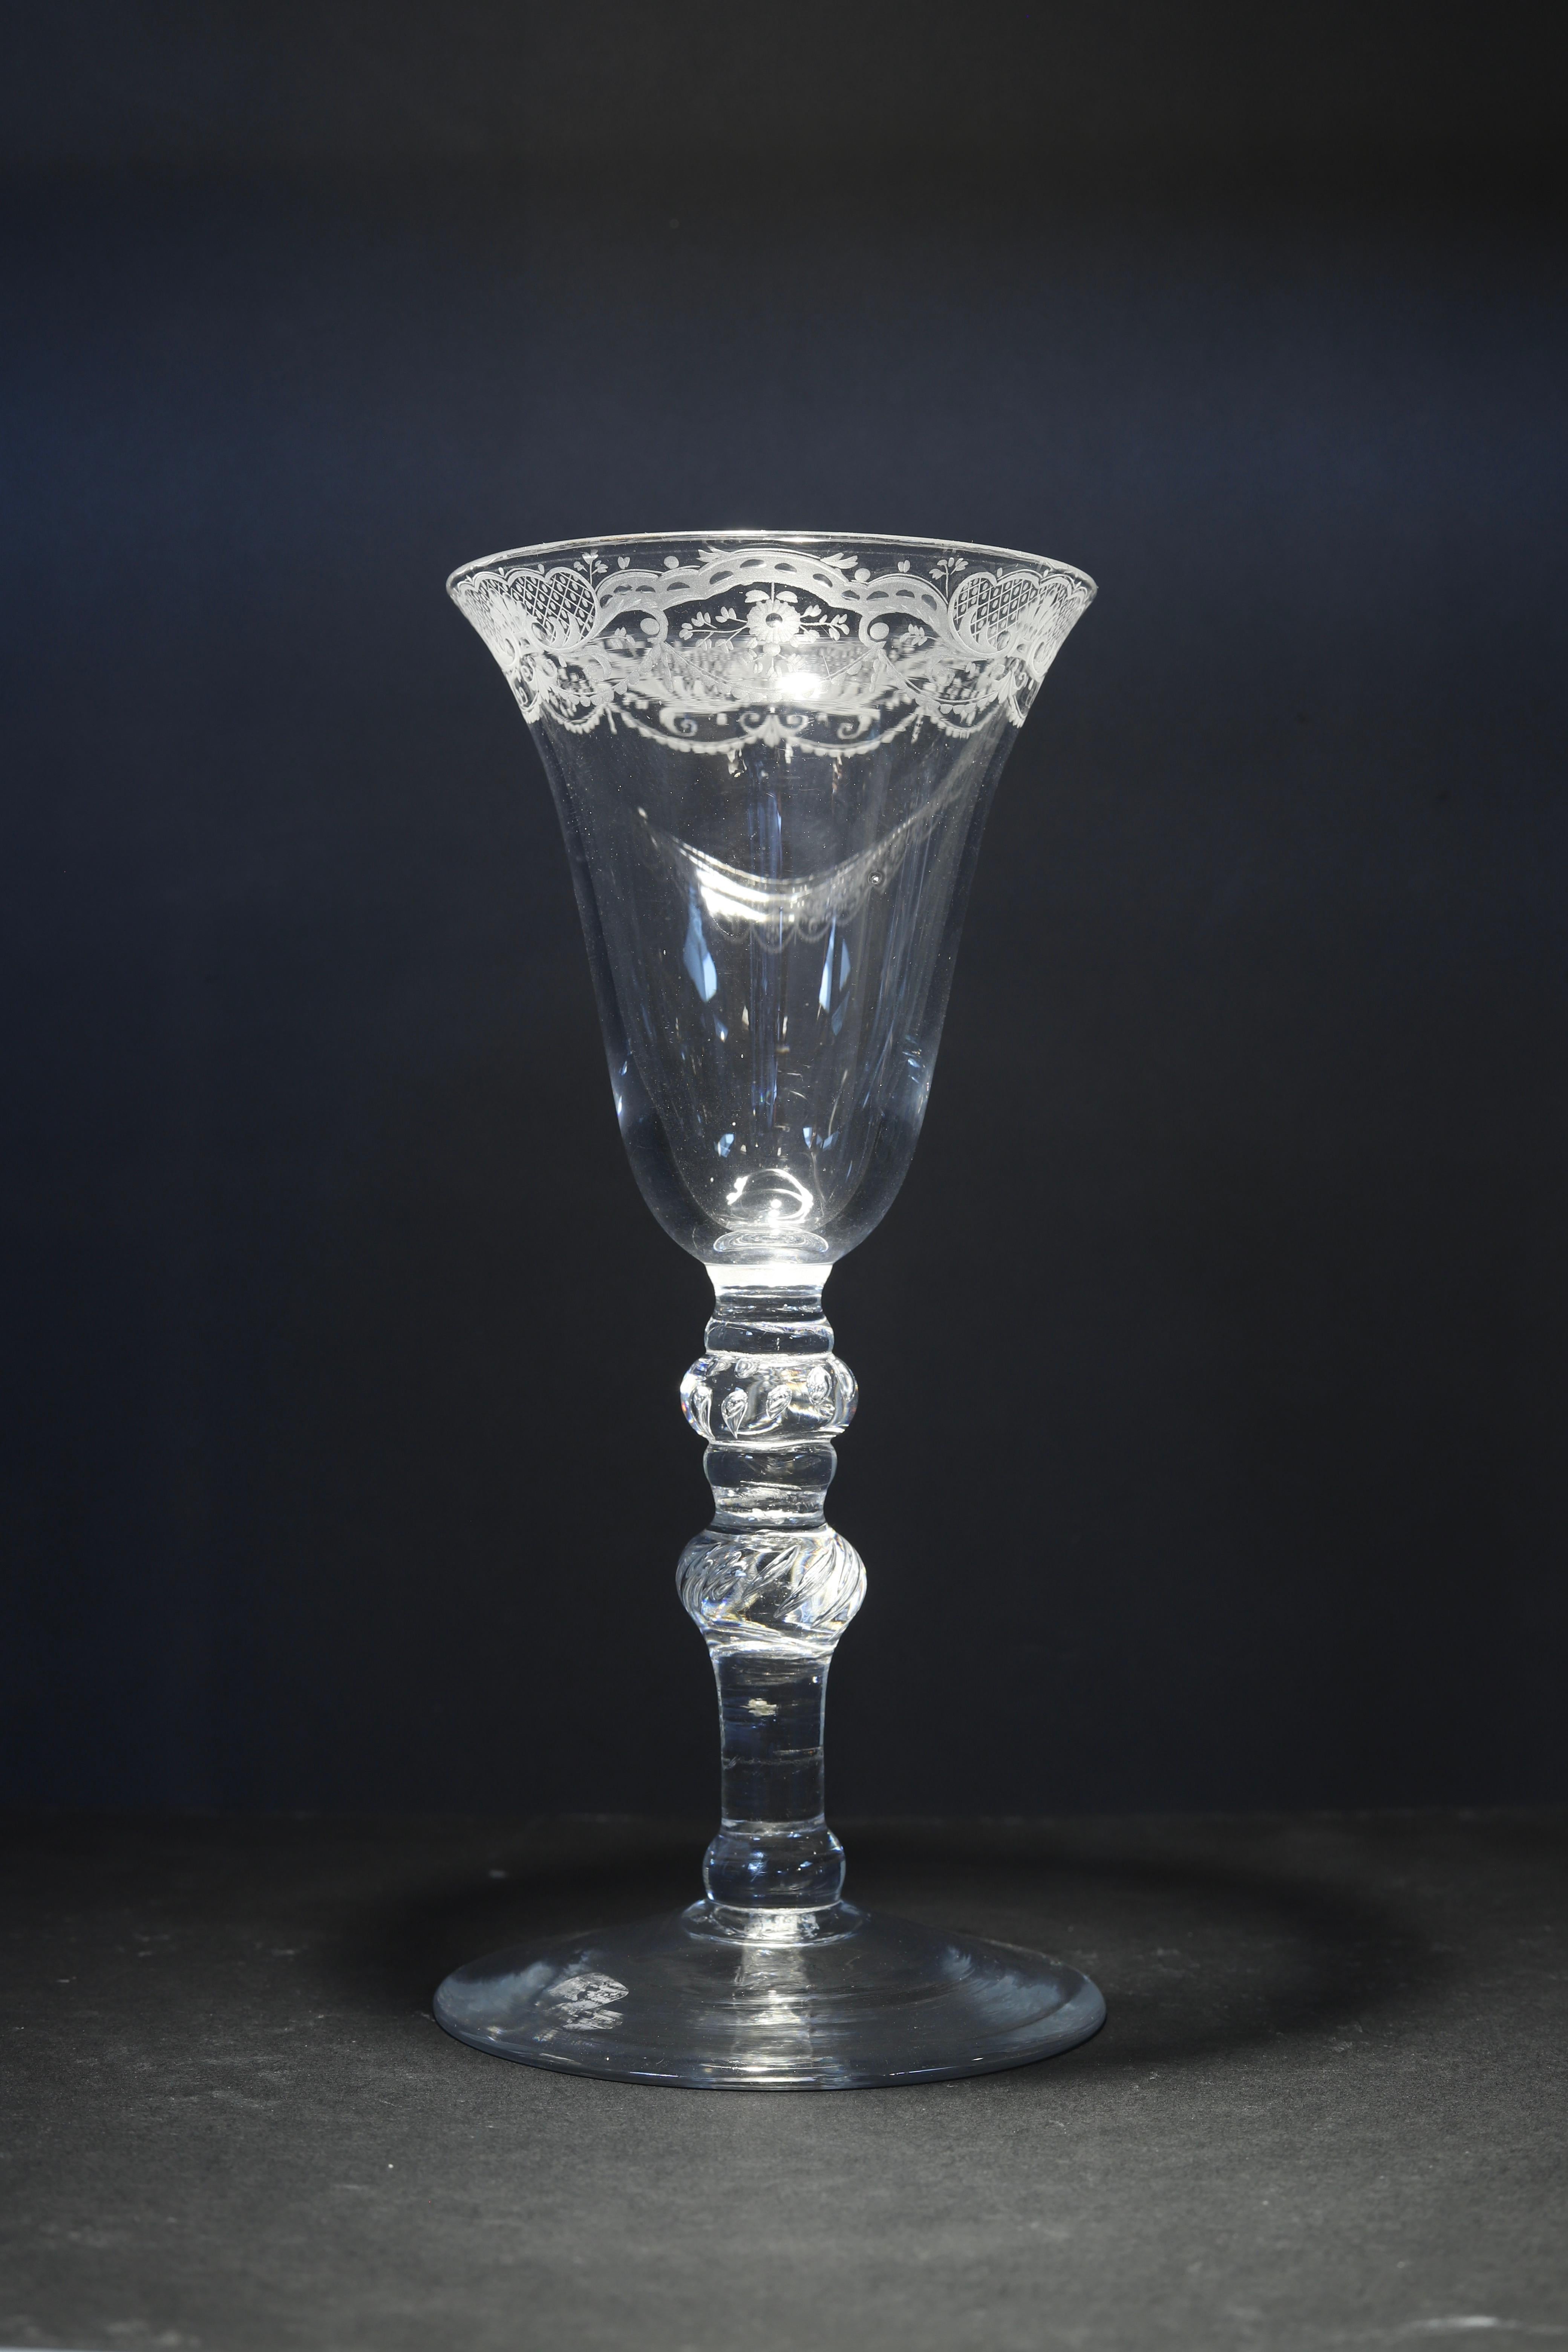 England, Newcastle
Engraving: English or Dutch
Mid 18th century

A heavy baluster Dutch? engraved wine glass with a bell-shaped bowl, the rim decorated with garlands, floral ornaments, and diaper work, the stem with multiple knops, of which two have